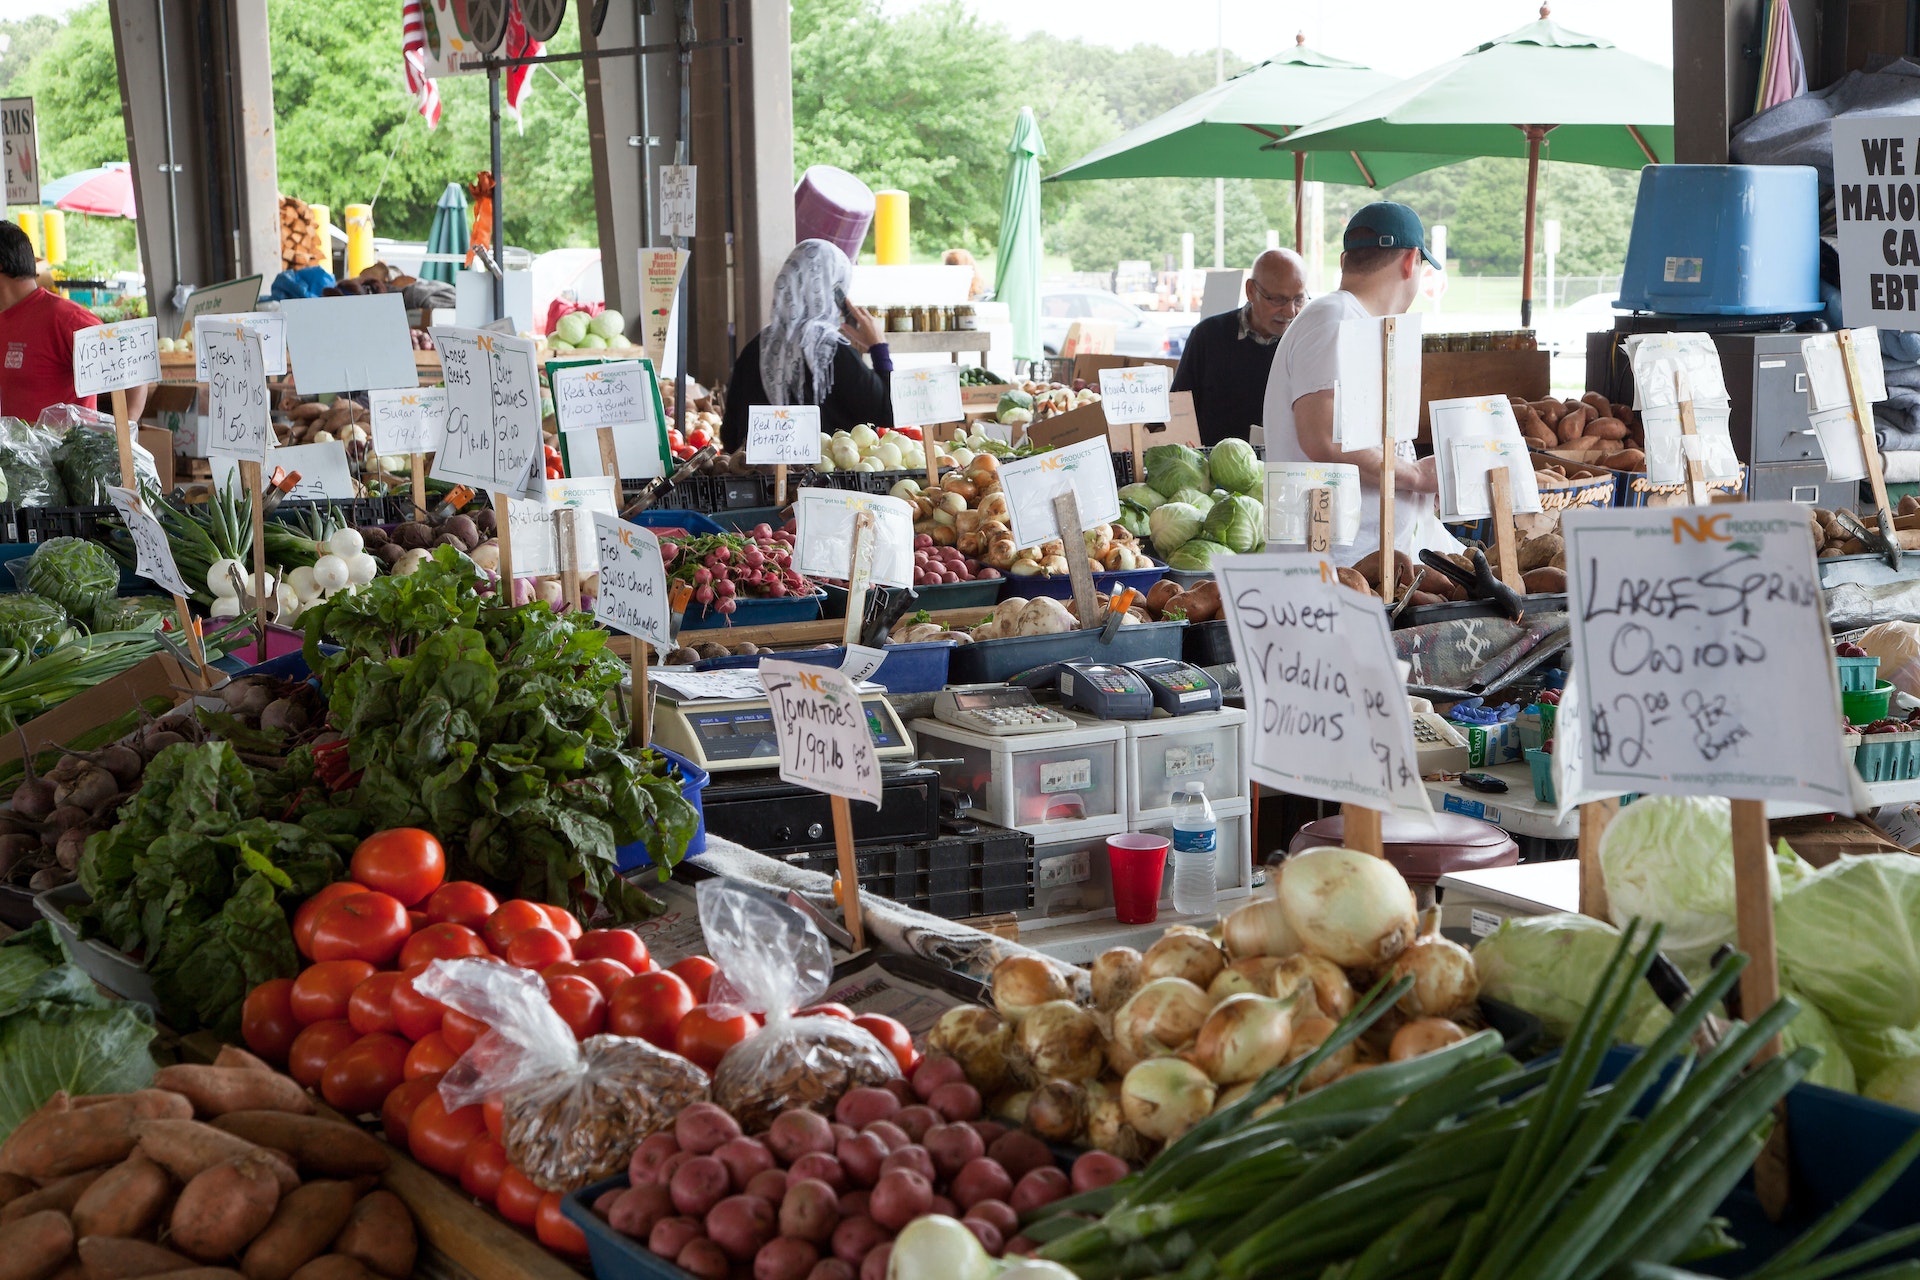 Top Five Reasons to Eat More Locally Sourced Food